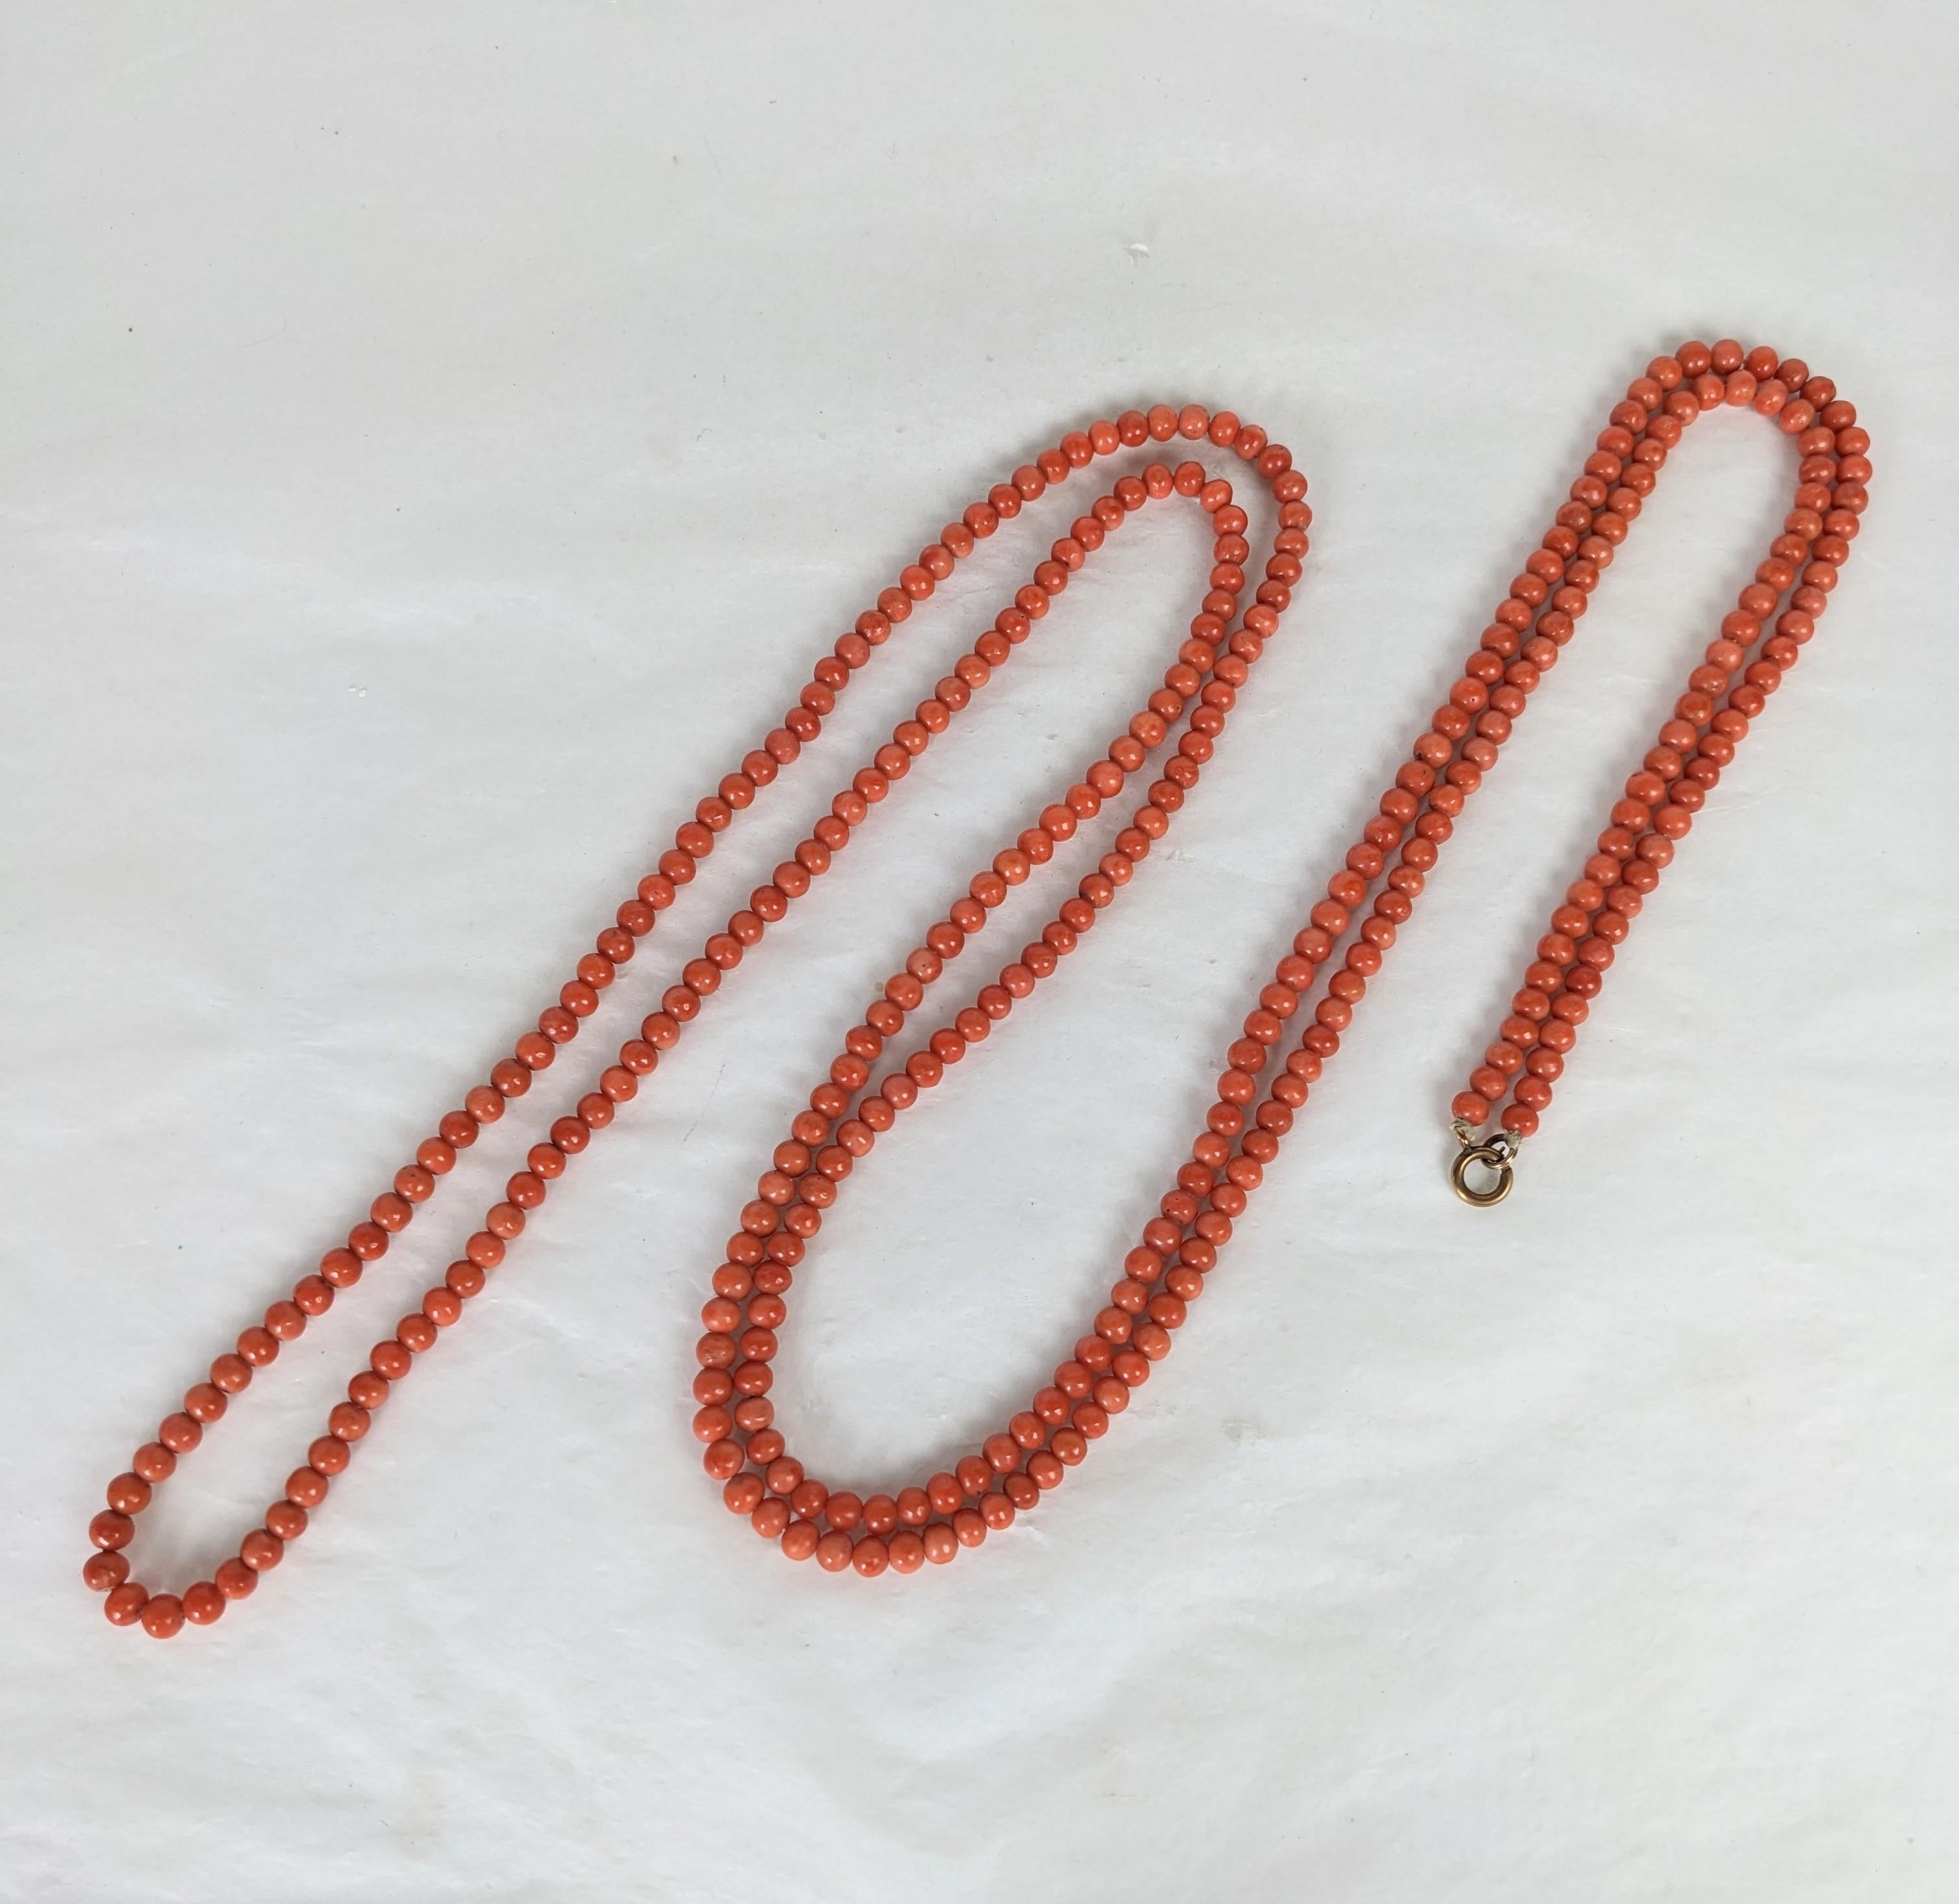 Super Long Victorian Undyed Genuine Coral Beads from the late 19th Century.  Beautiful salmon red-orange color, rare long length, extremely versatile to wrap or use multiple times as a bracelet. 19th Century Italy. Original gold clasp. 5 mm beads.